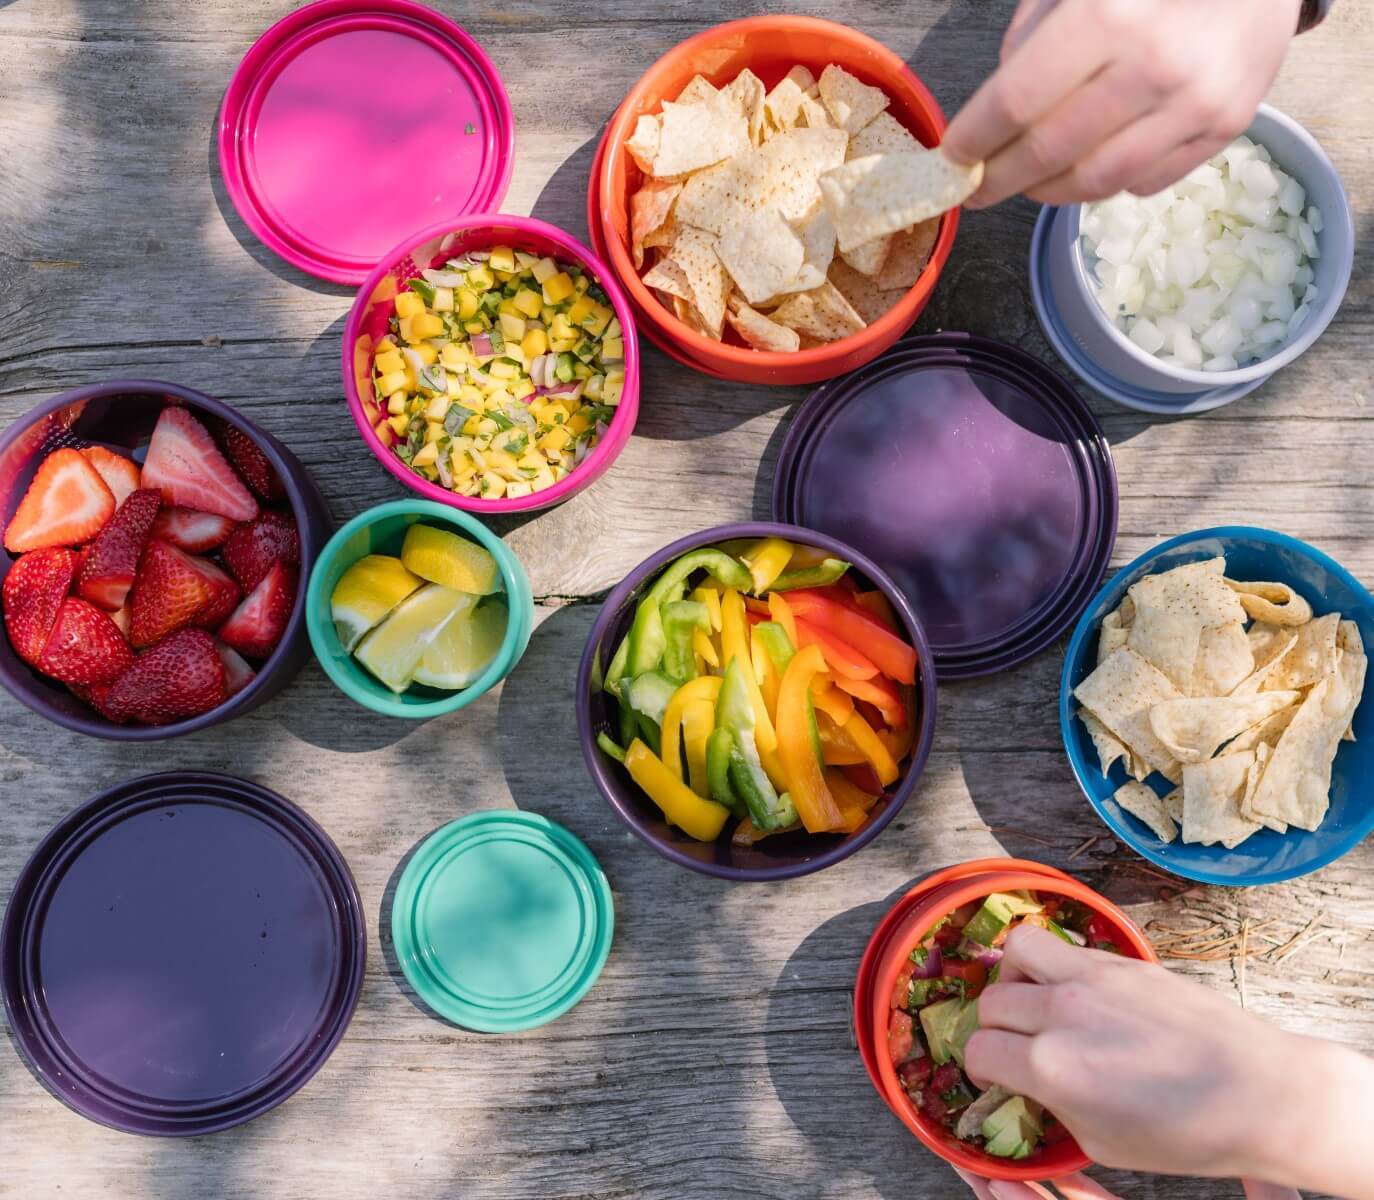 Enjoying a picnic with Silipint Silicone bowls and Eatware